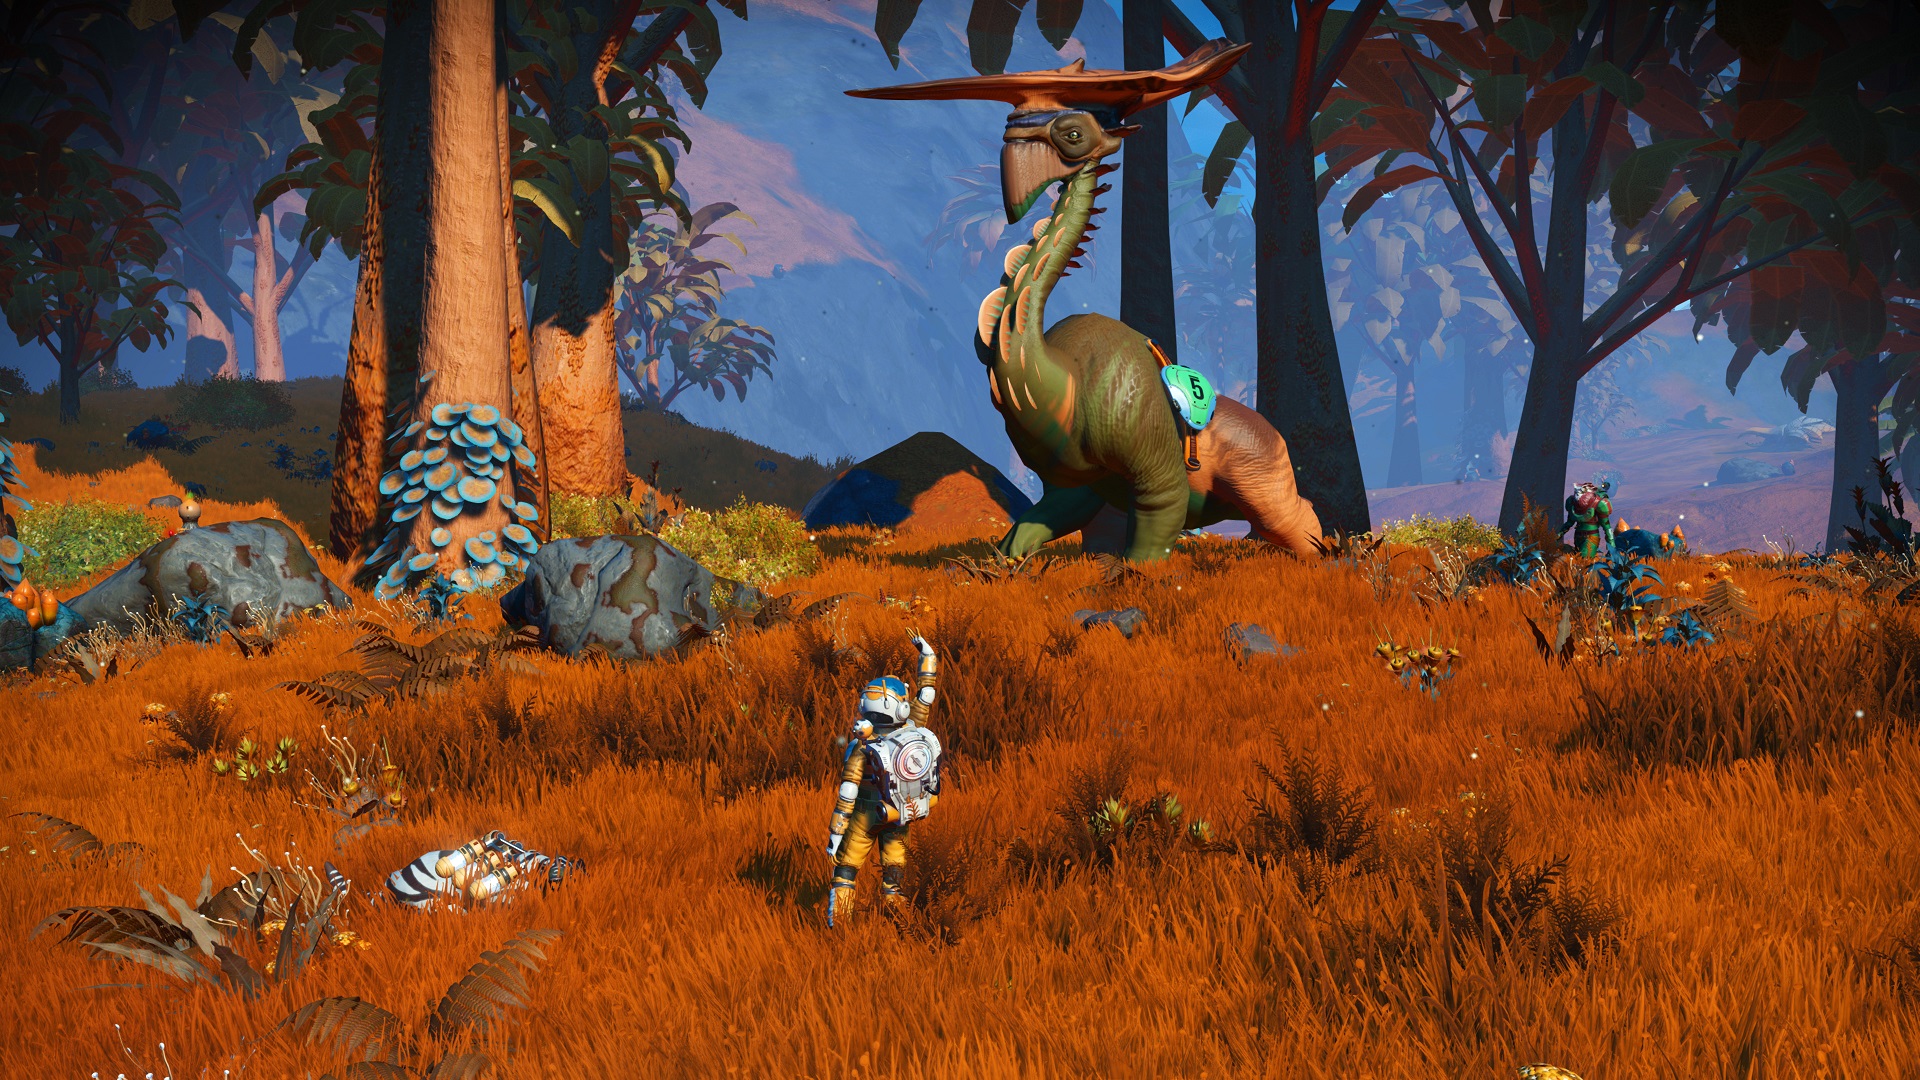 A player hailing a giant animal in No Man's Sky